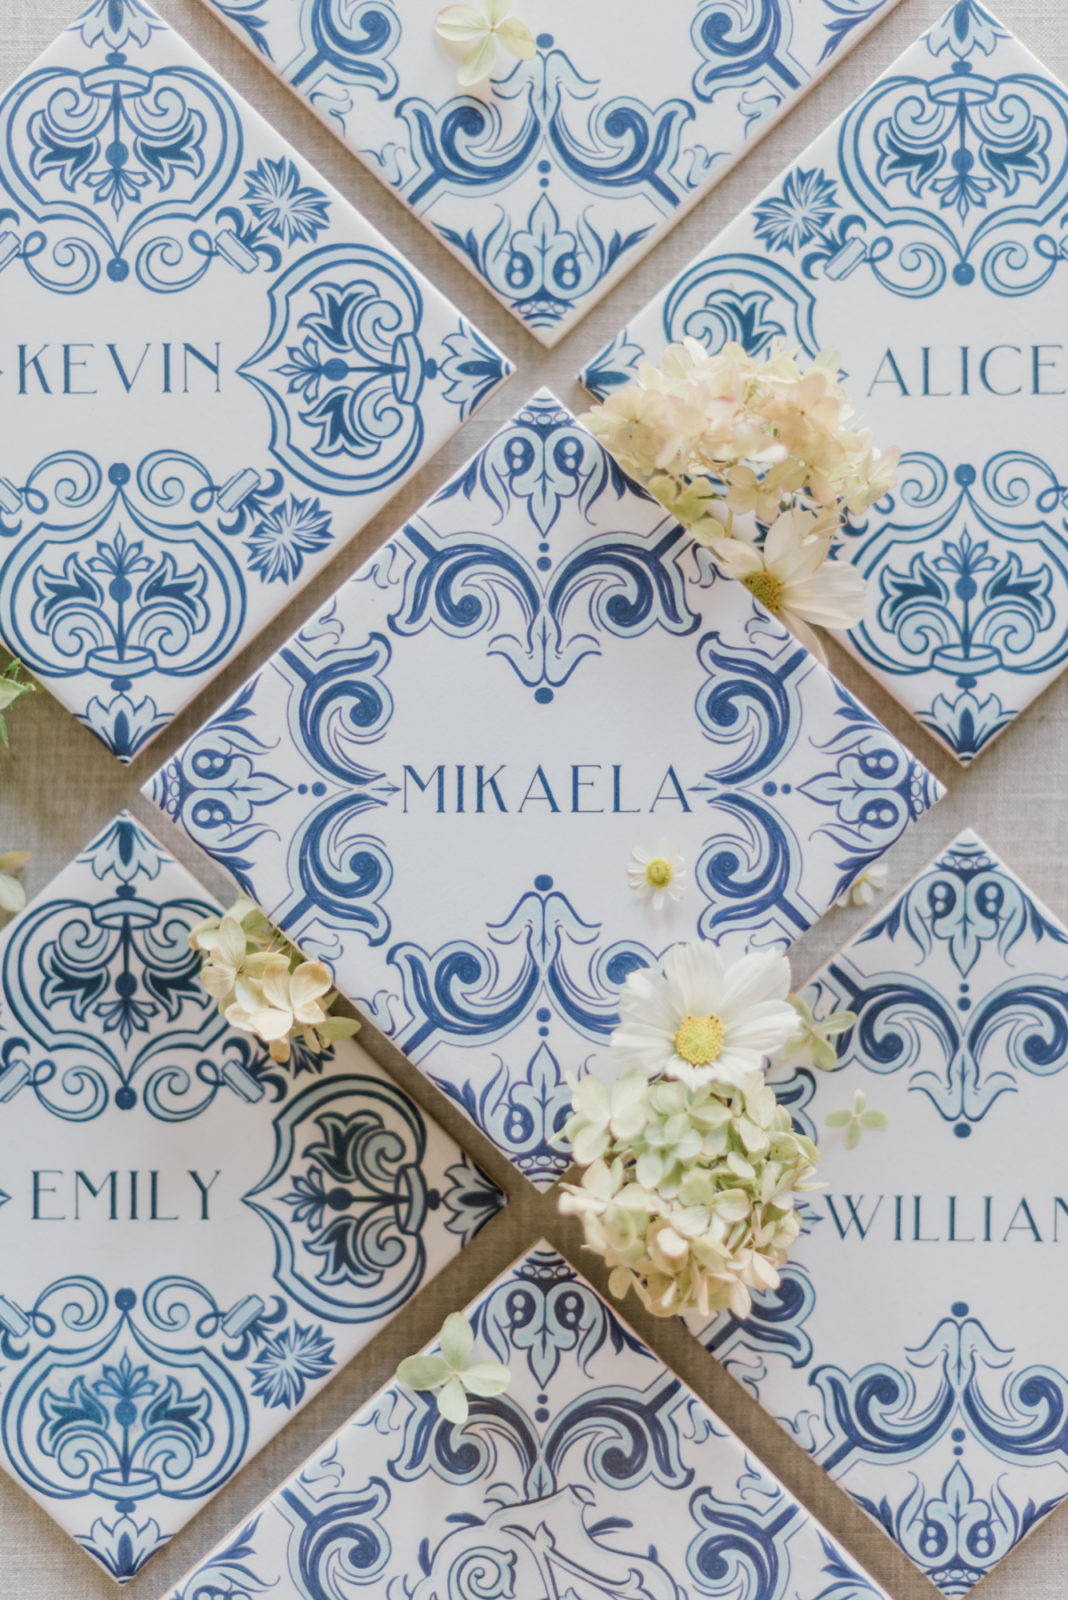 Portugal inspired wedding day place cards